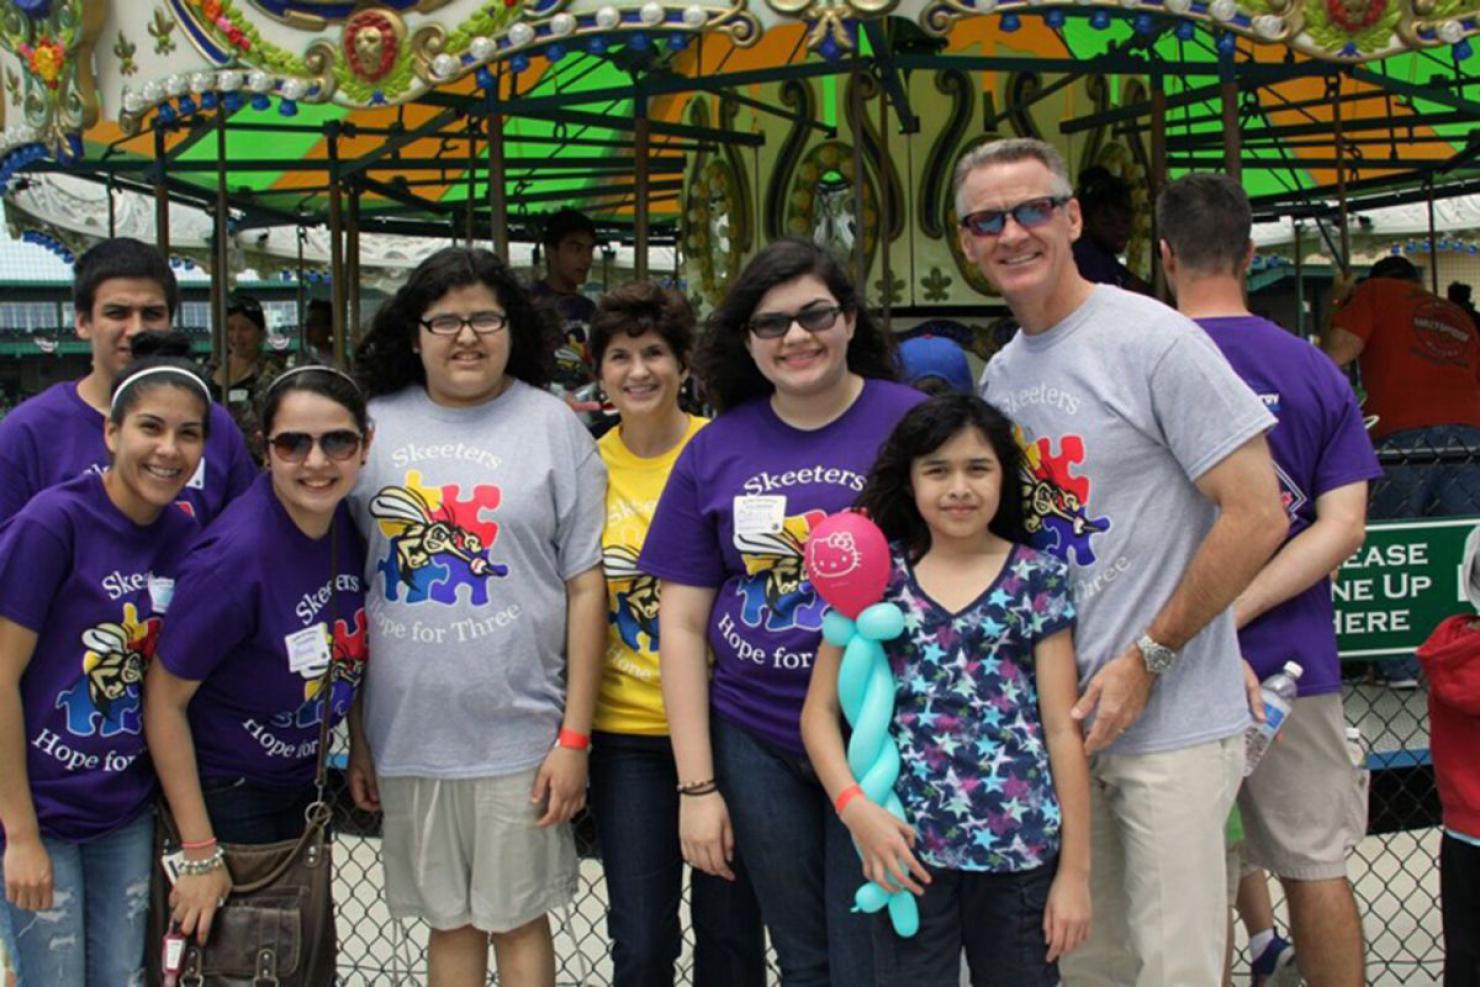 Rangeland President Chris Keene with participants in “Strike Out” Autism, Hope for Three’s annual key awareness and fundraising event held in conjunction with the Sugarland Skeeters Baseball Club. Rangeland is a sponsor of the event.